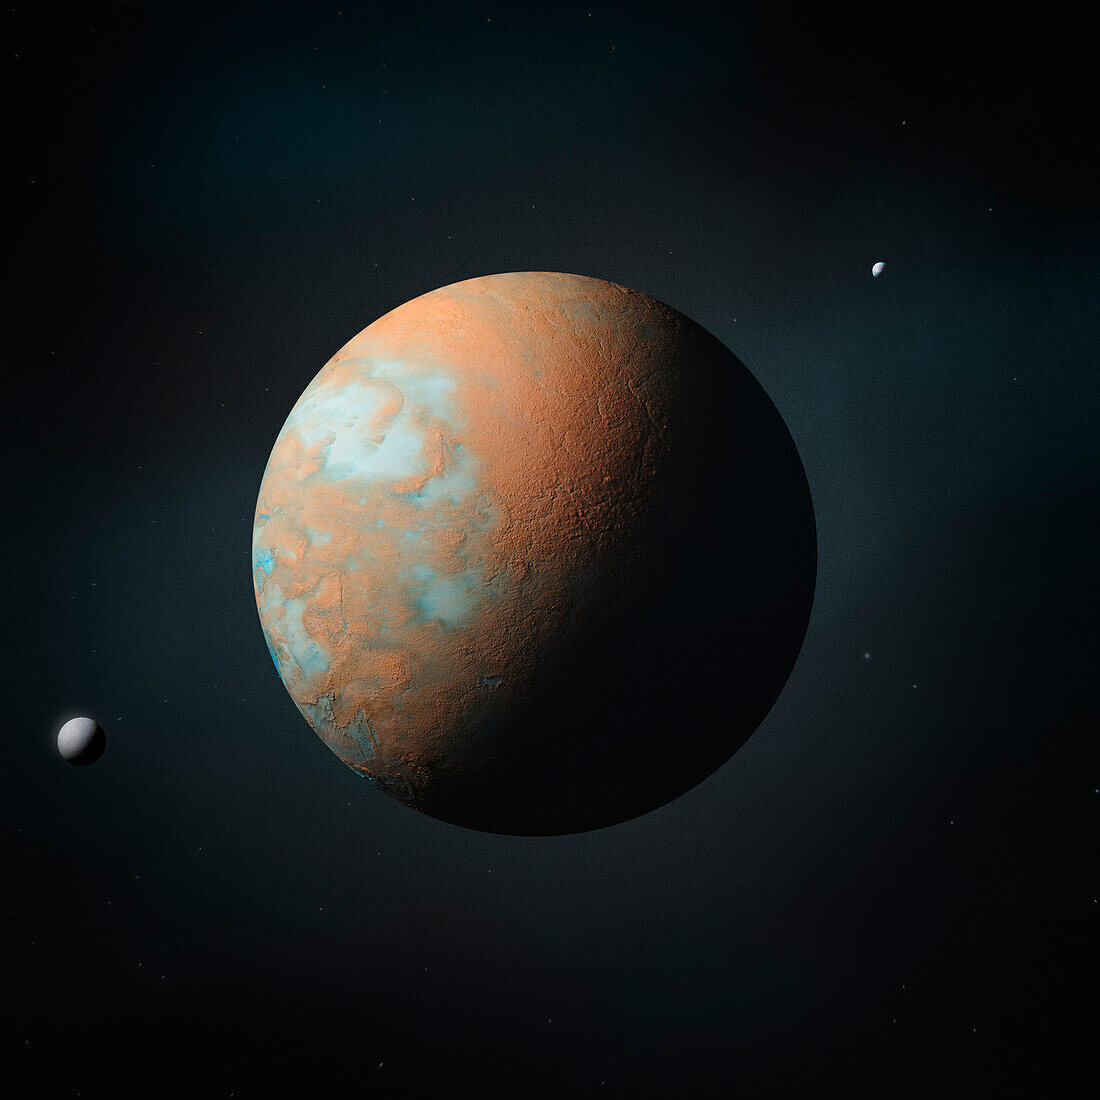 Earth-like exoplanet with moons, composite image